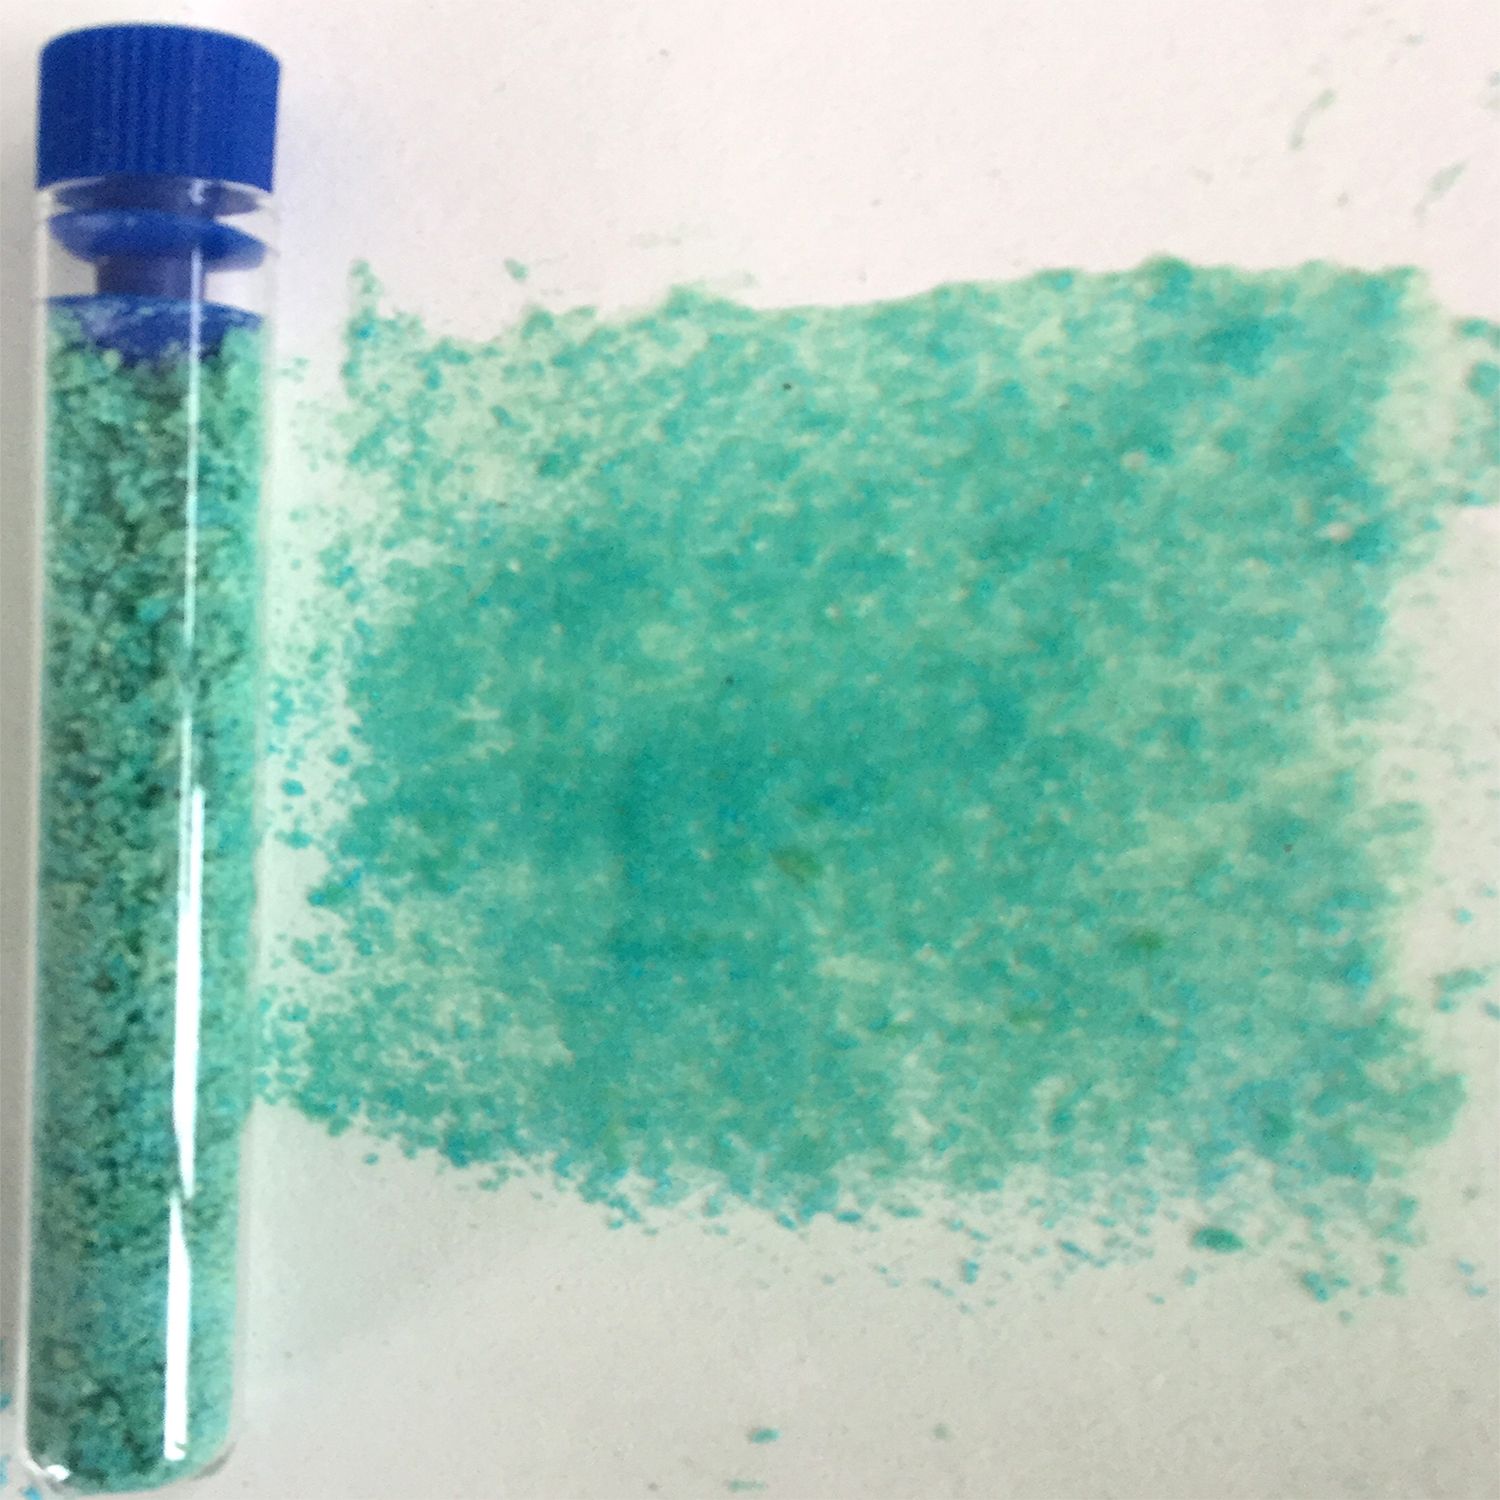 Sample of pigment in bottle and record on paper